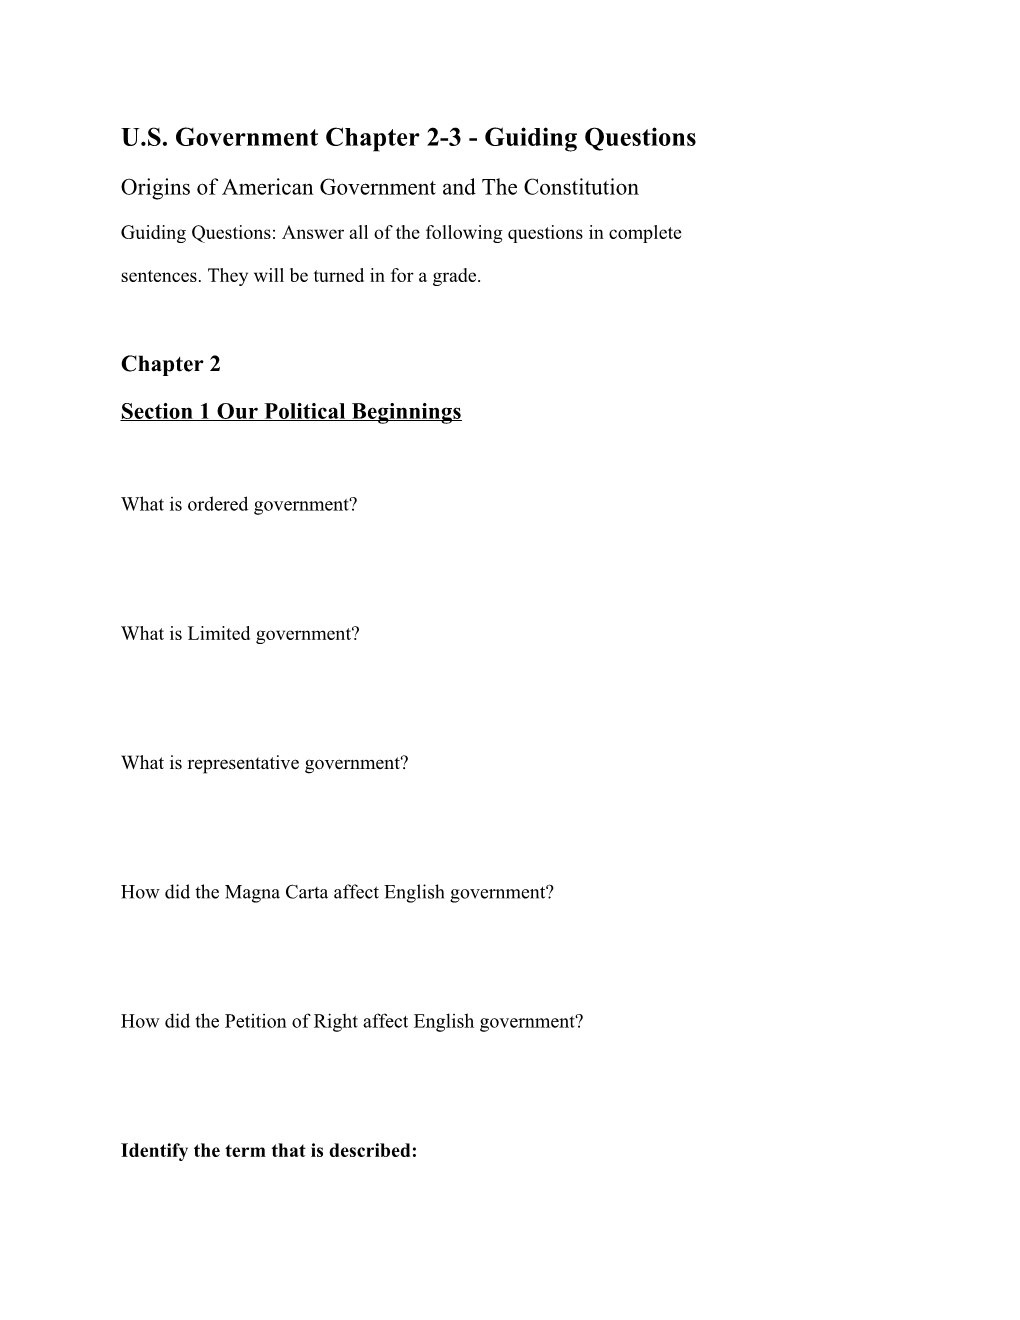 U.S. Government Chapter 2-3 - Guiding Questions